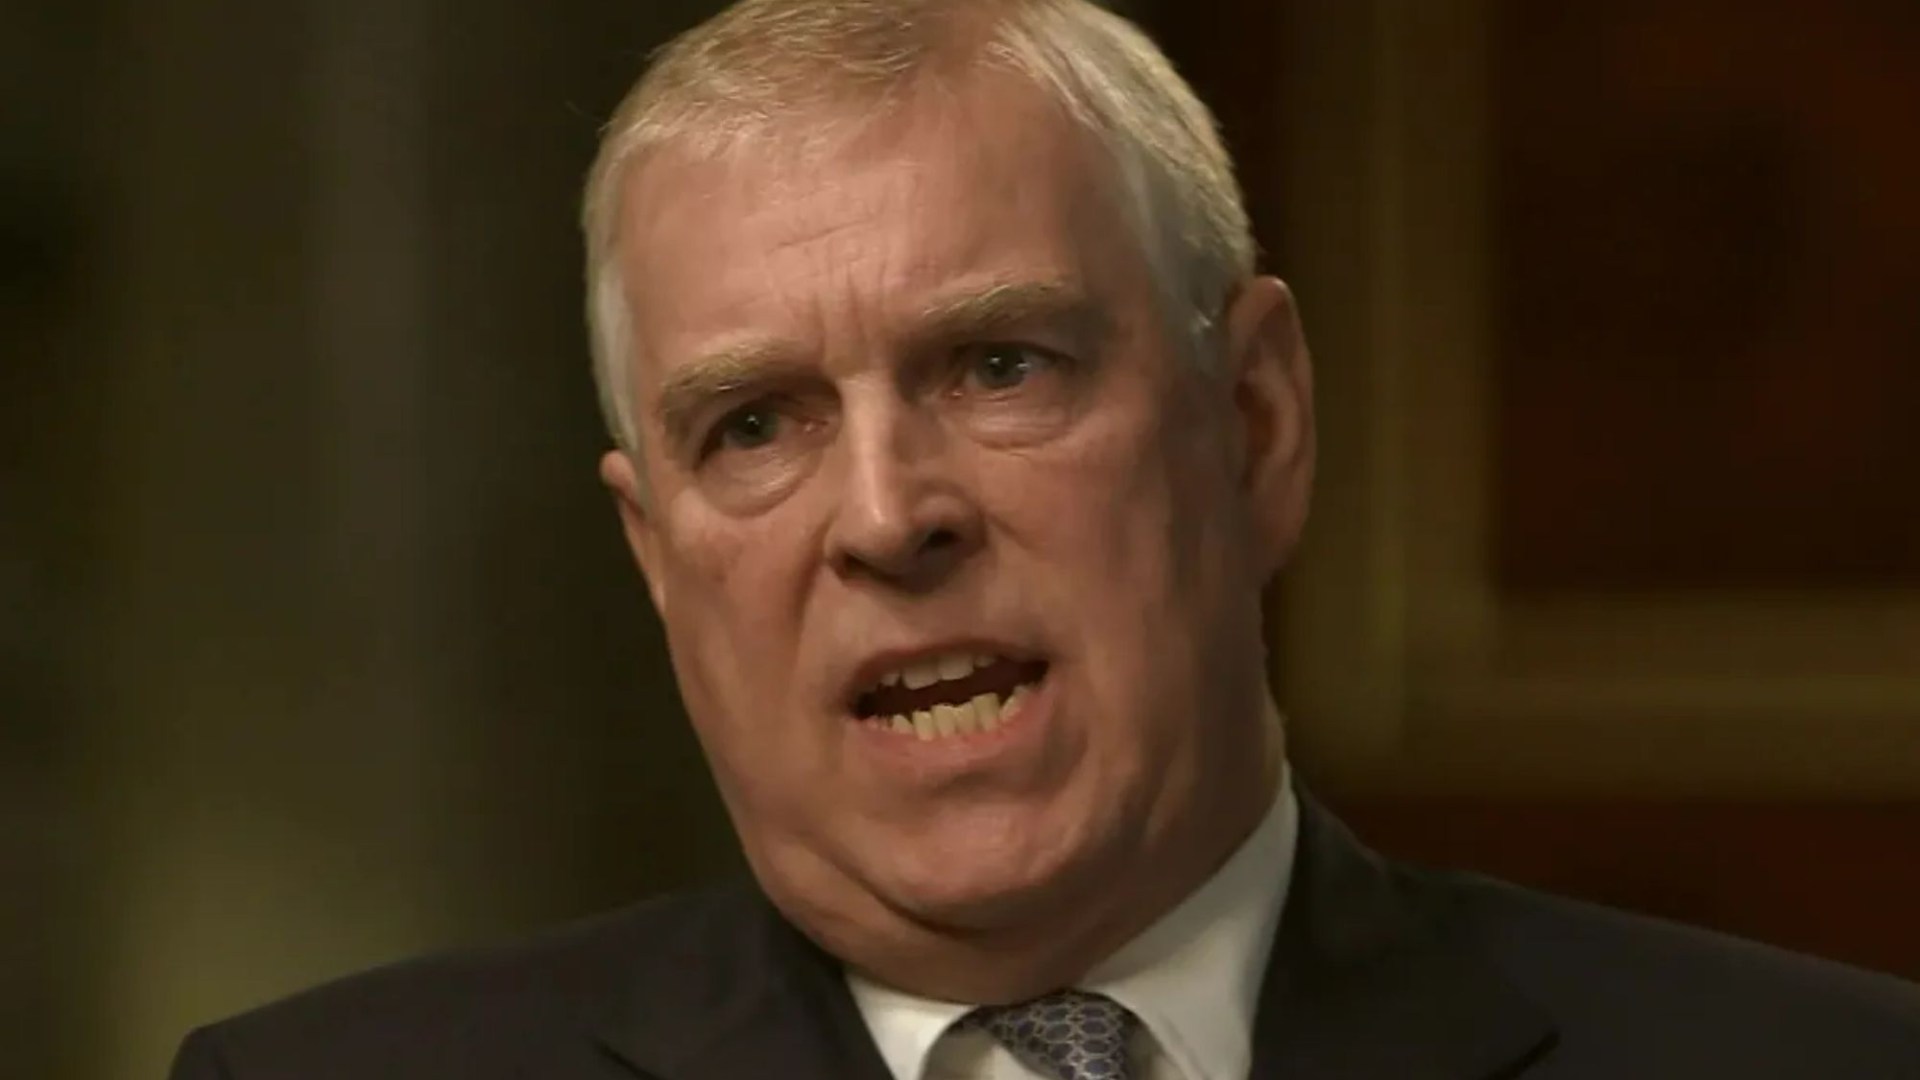 Key moment Prince Andrew ‘lost composure’ & realised Newsnight interview ‘wasn’t a walk in the park’, revealed by expert [Video]